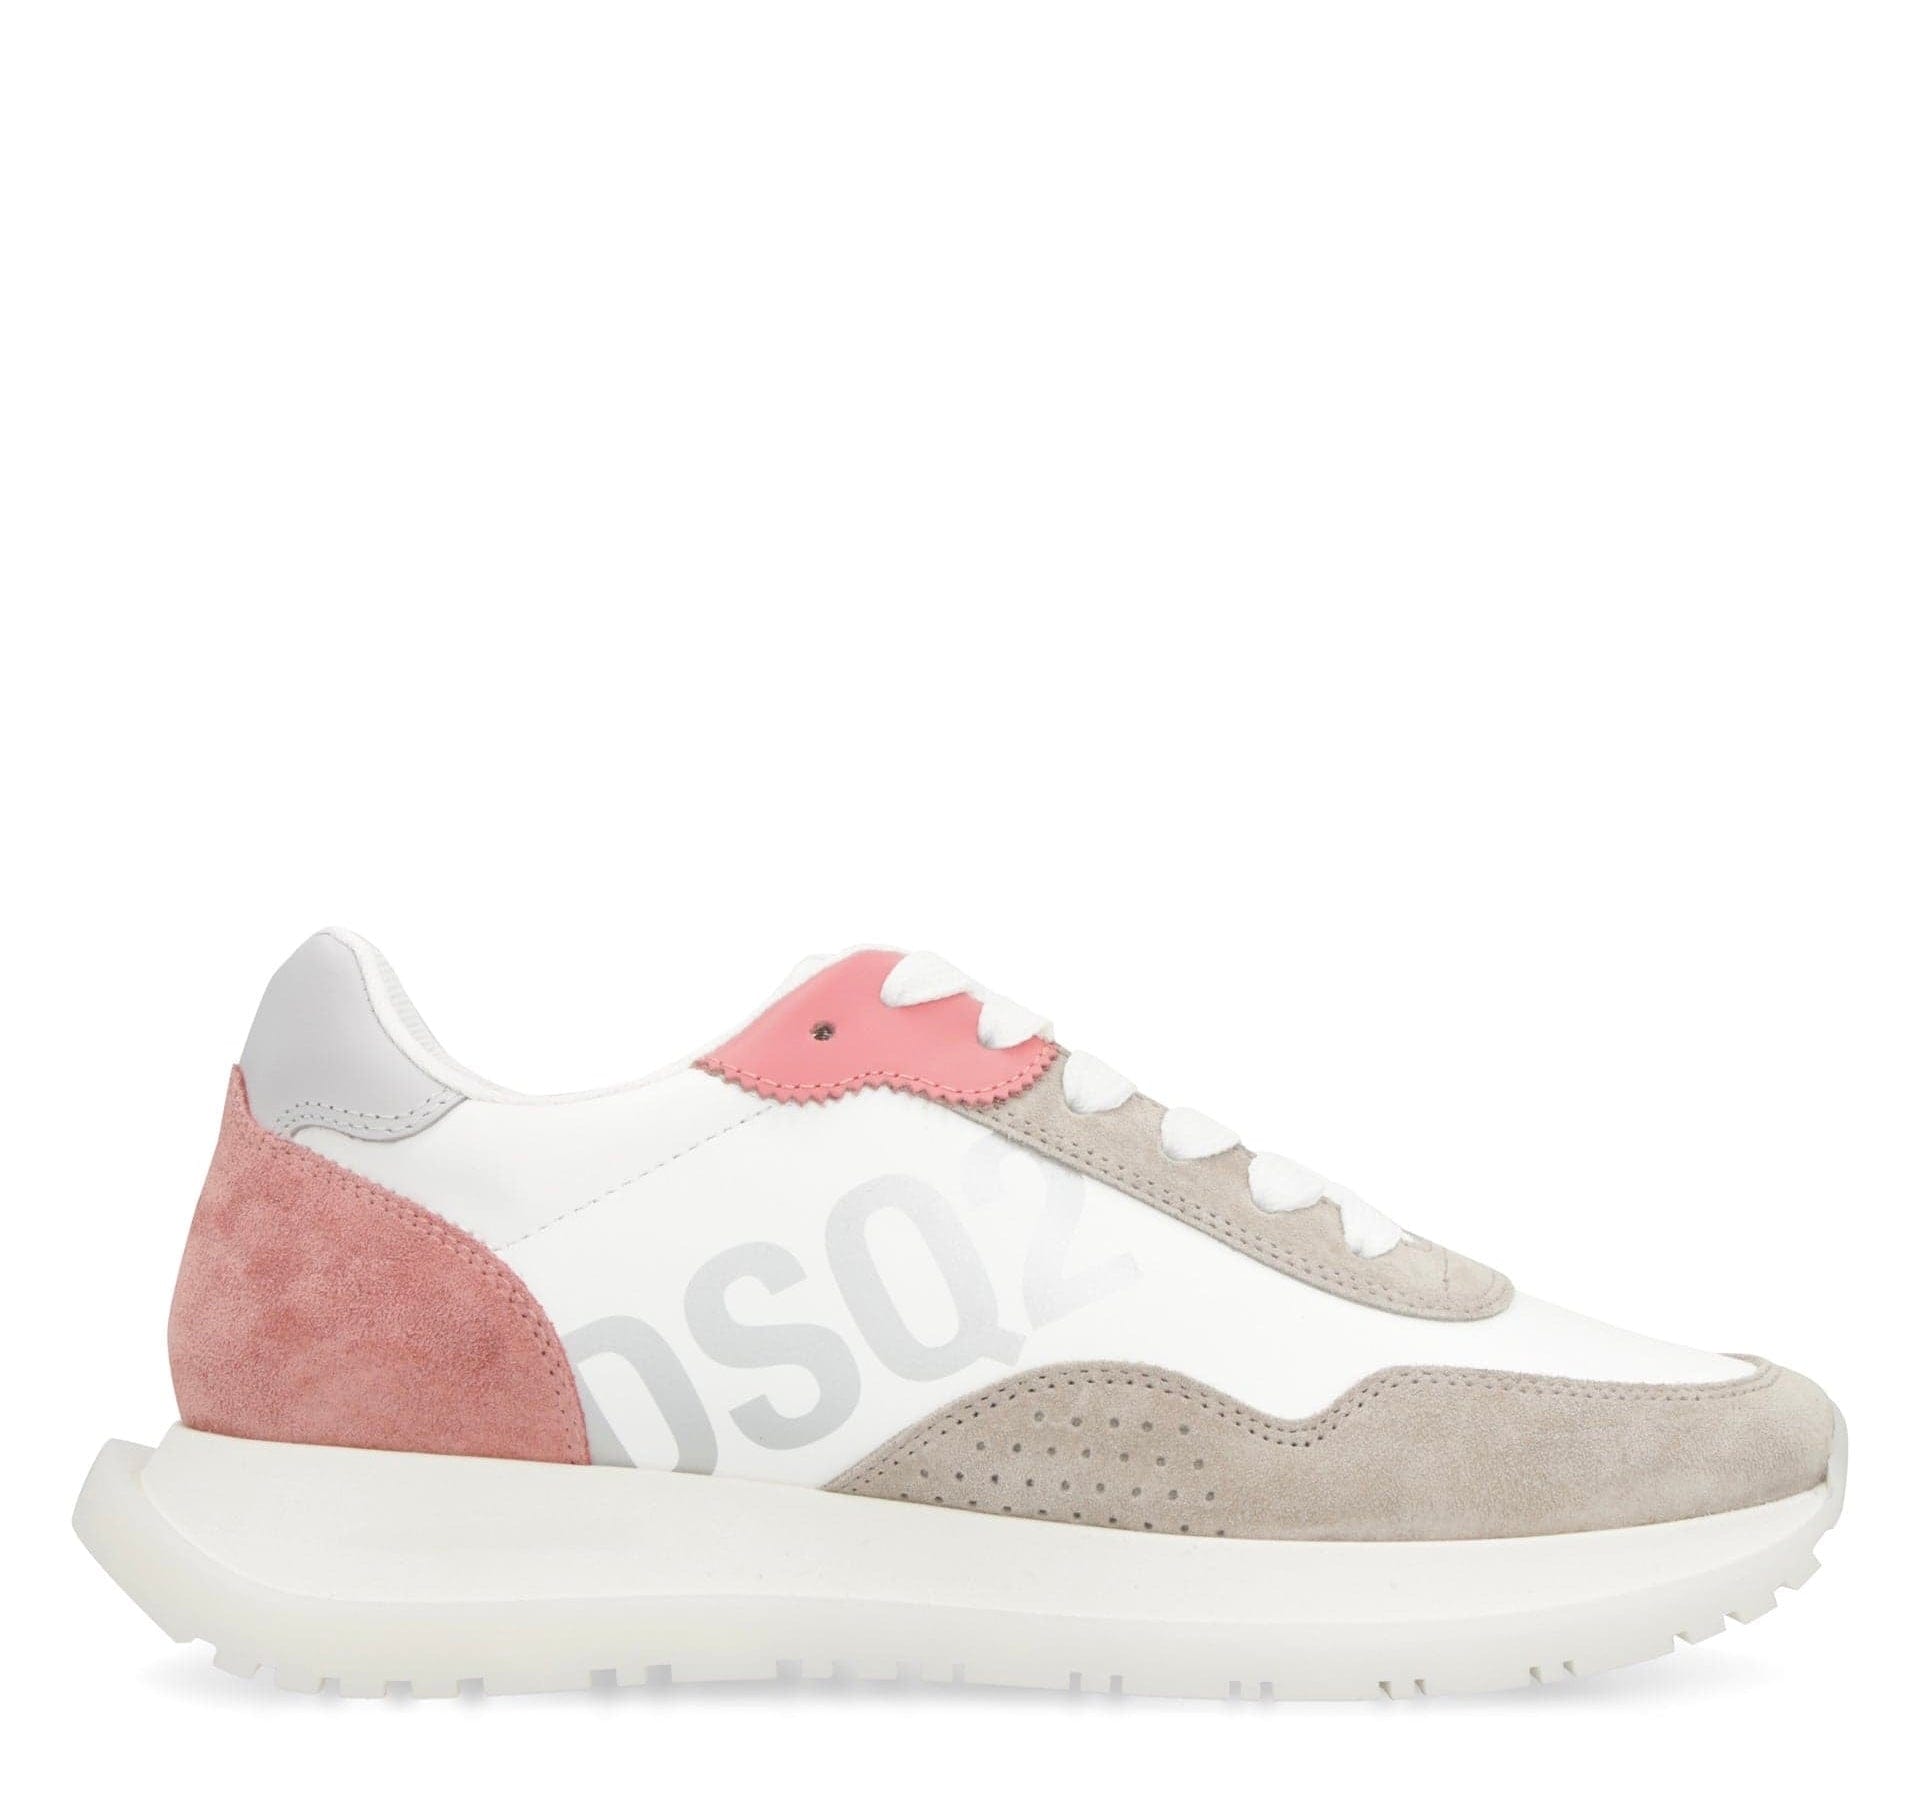 LOZURI SHOES RUNNING LEATHER LOW-TOP SNEAKERS